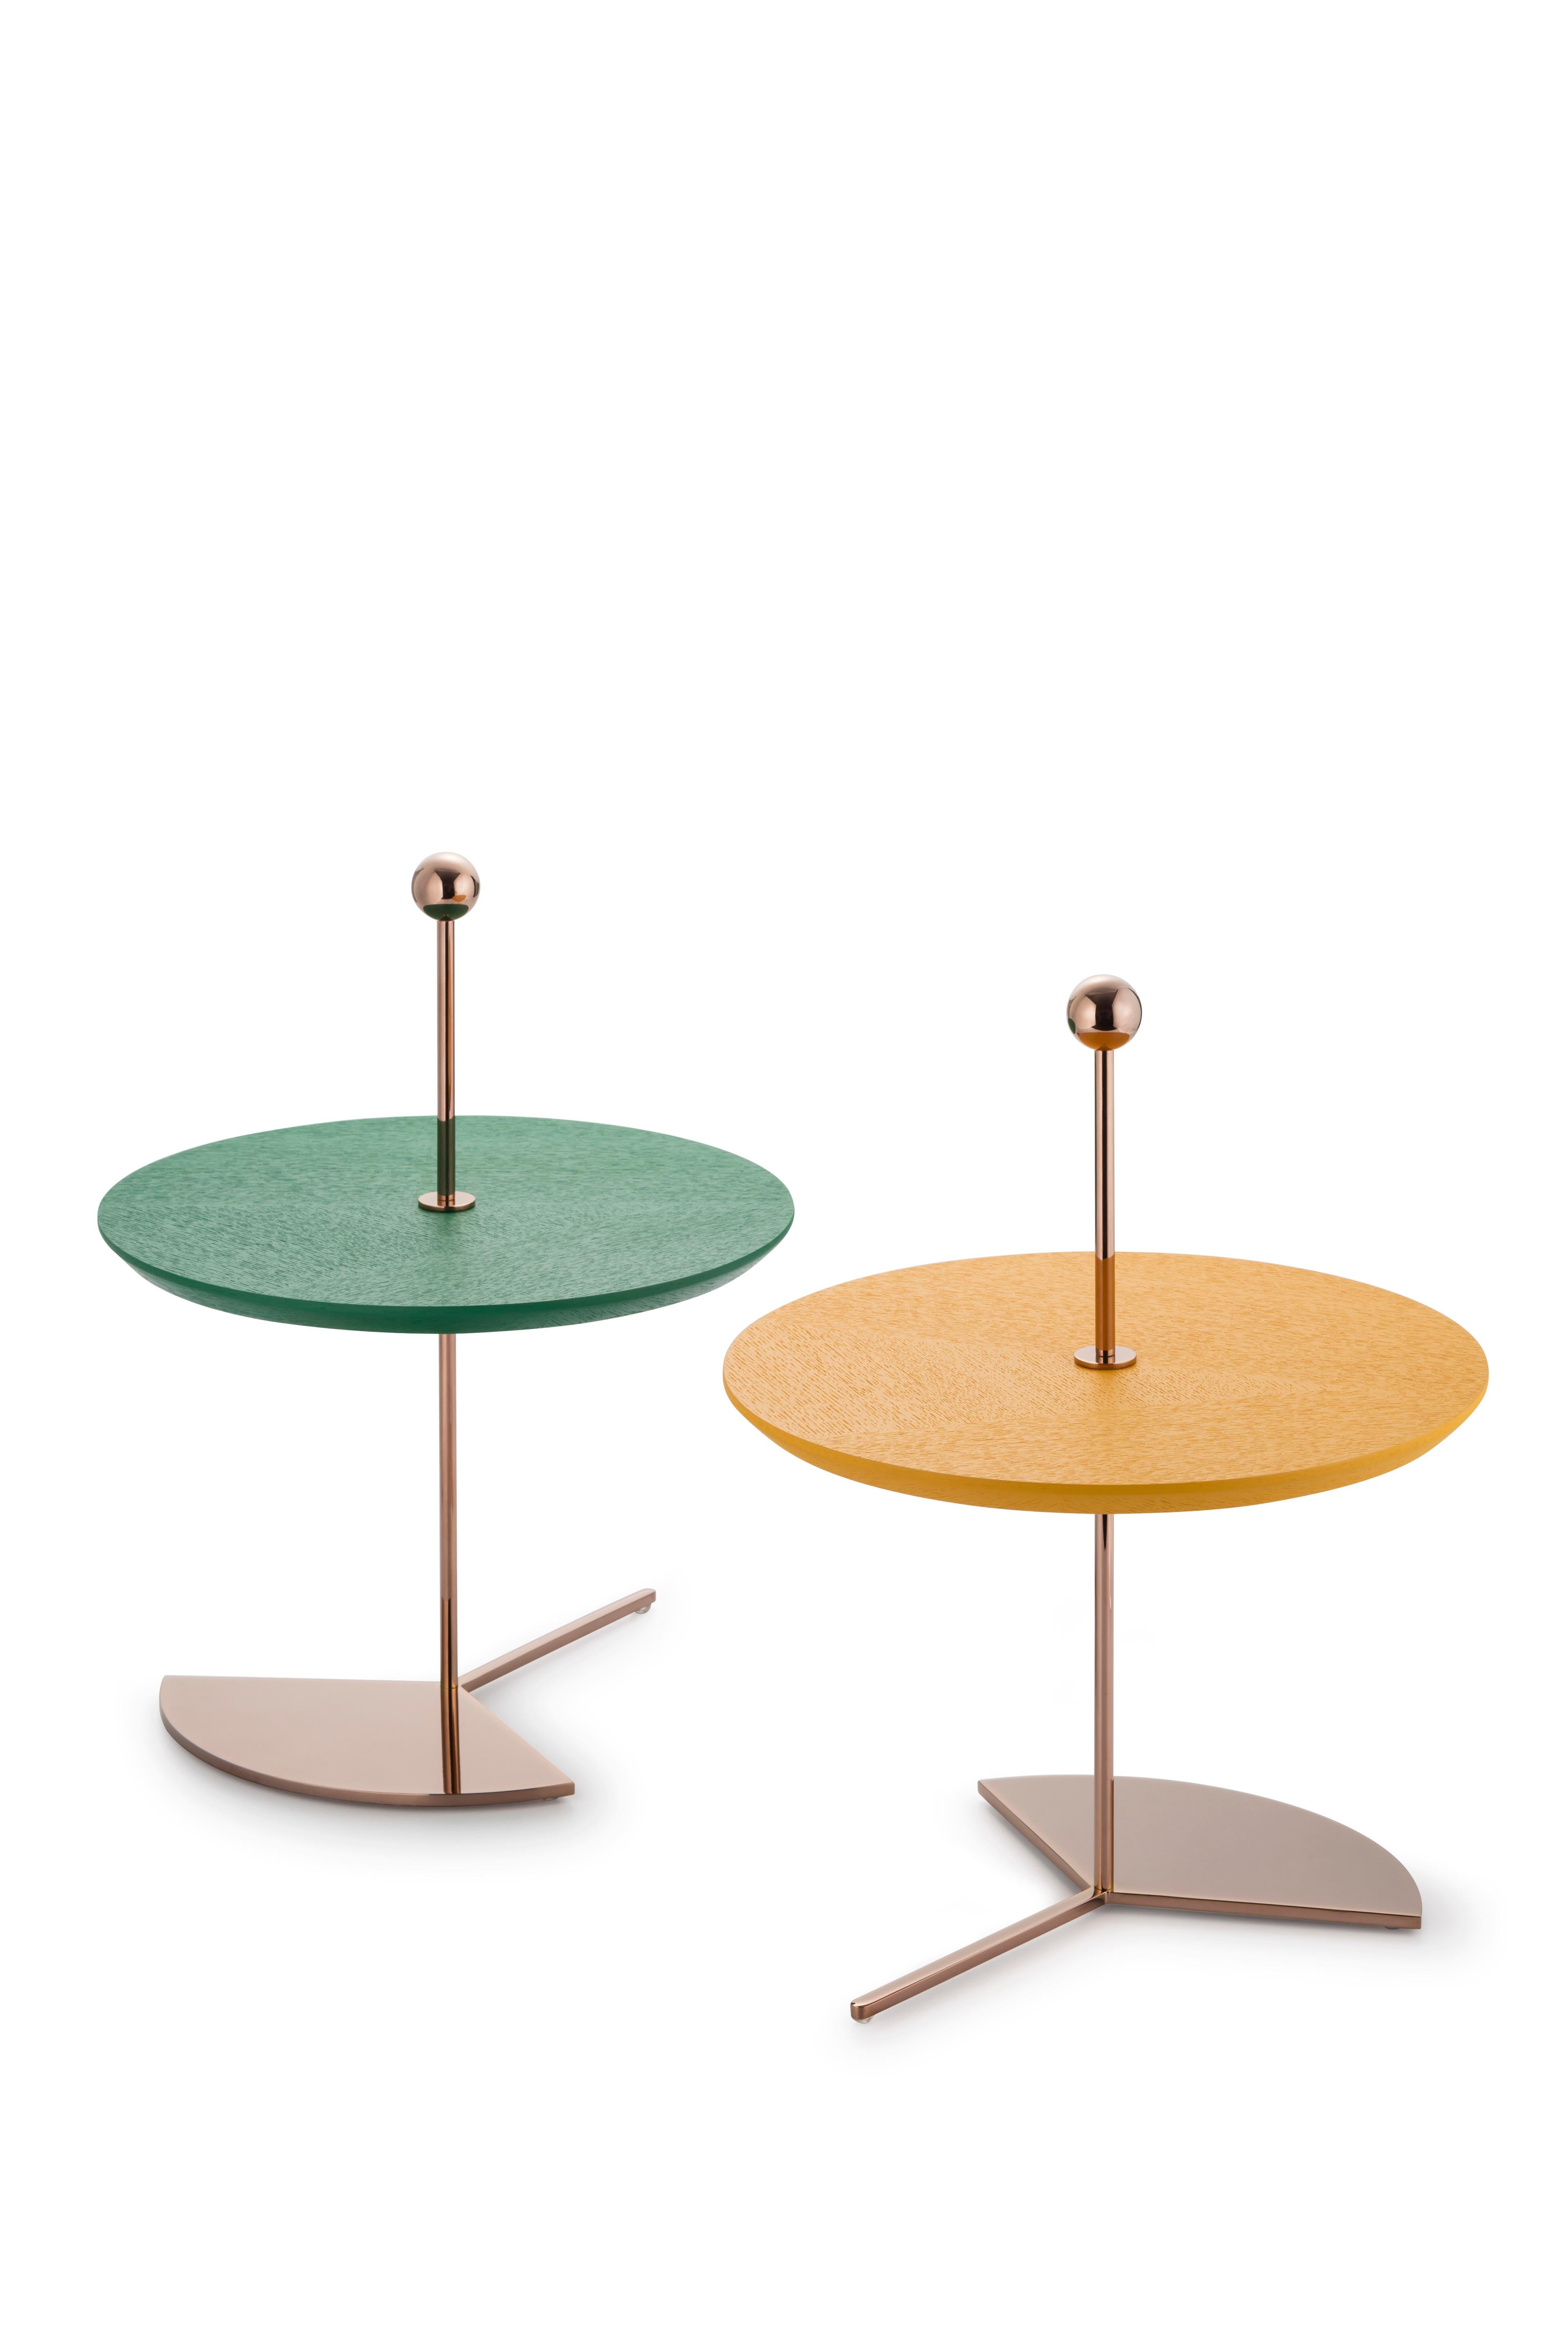 Contemporary cake stand
Measure: Diameter 30 x height 38 cm
Tray in natural colour ash veneer
Base and handle in plated metal coated with glossy Pink Copper finish
Available in 3 colours (Wood, Green or Yellow)
From Earth, one can only see the